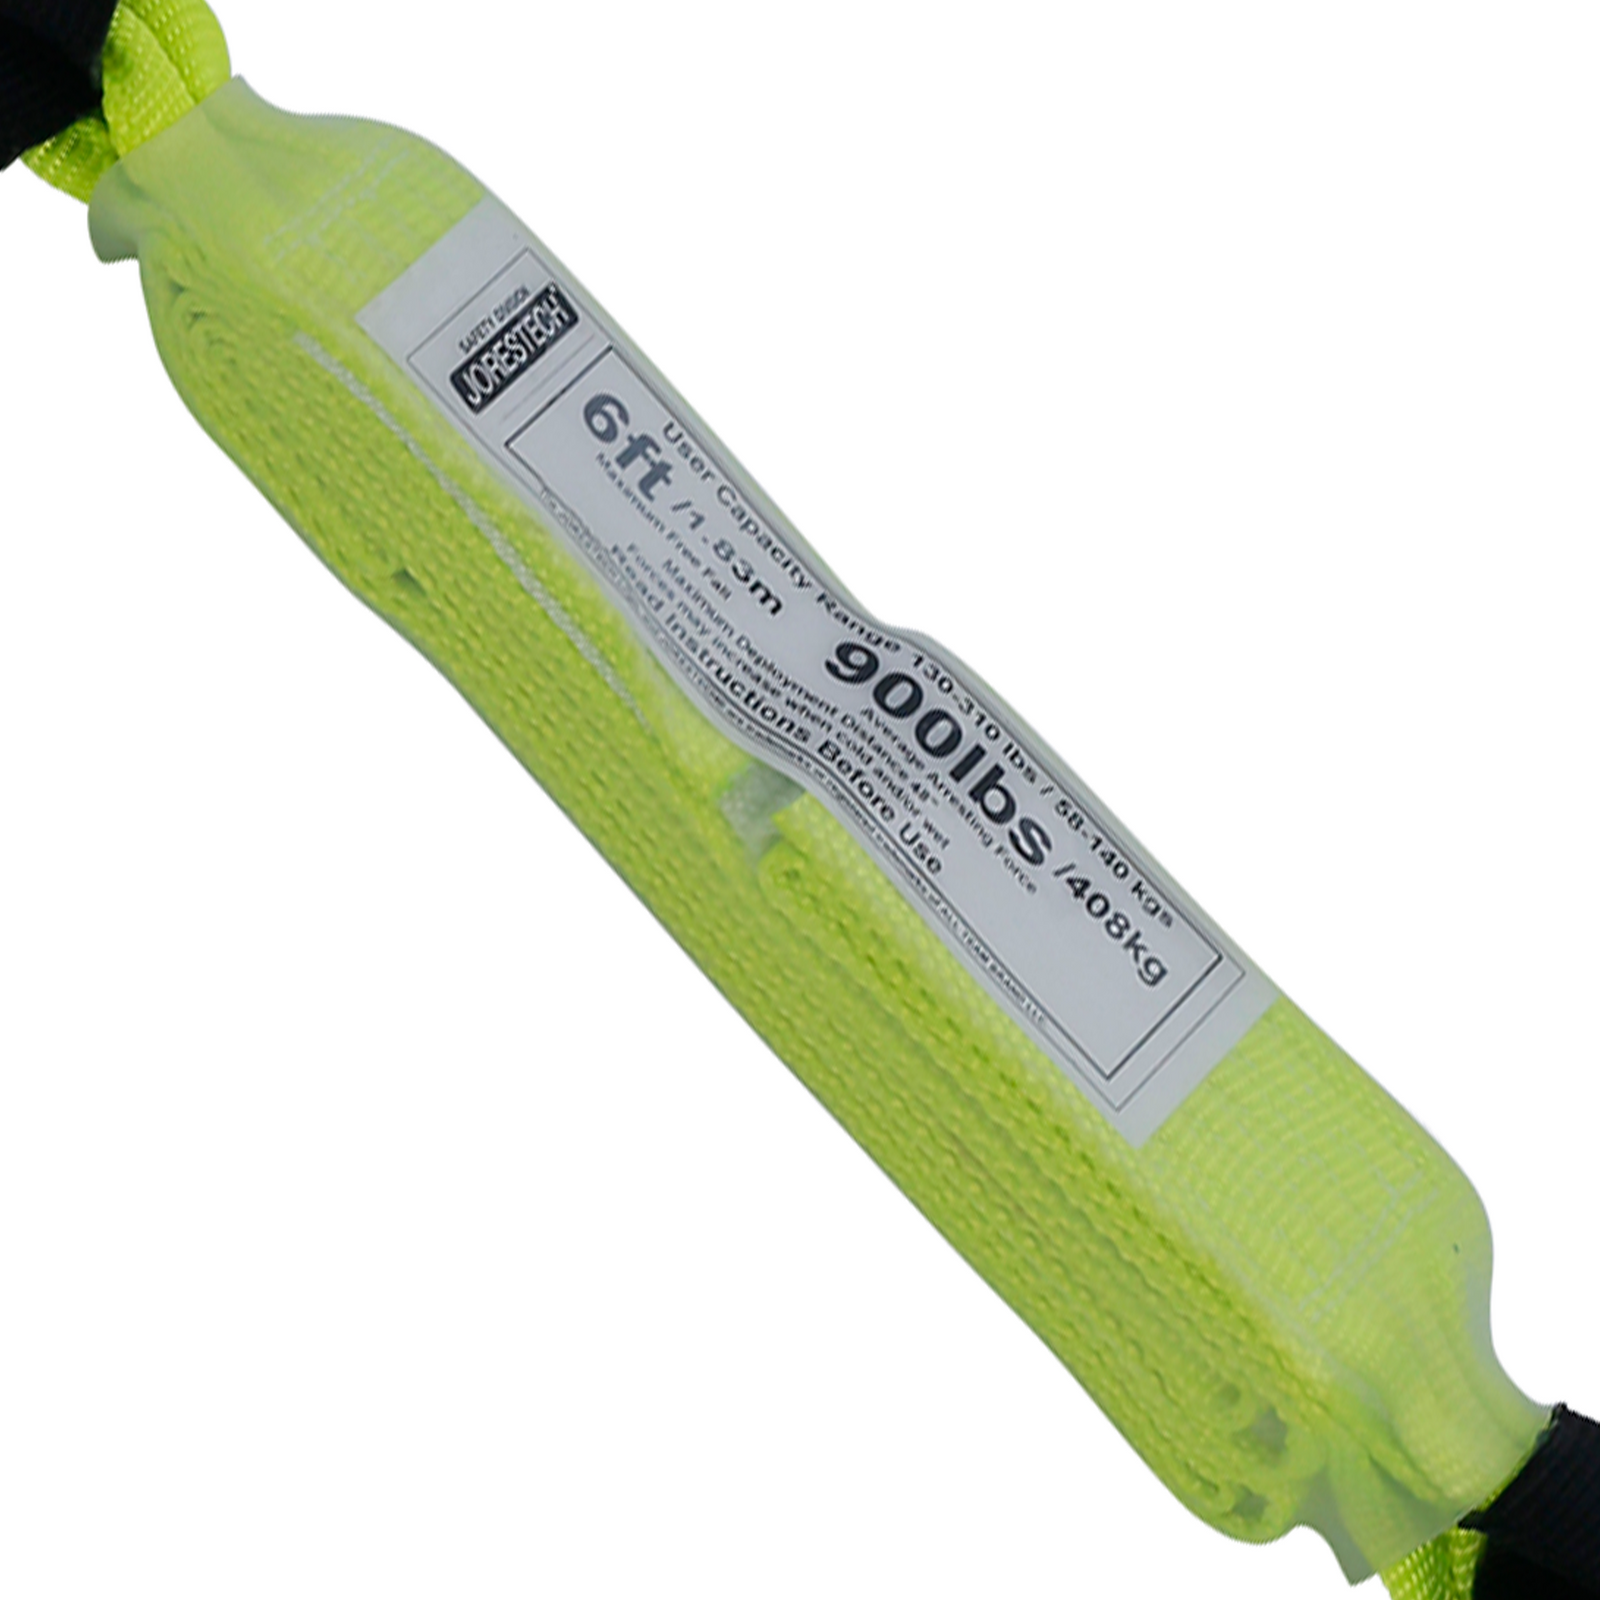 Close up to show the shock absorbing portion of the hi-vis lime single leg internal lanyard with snap hooks